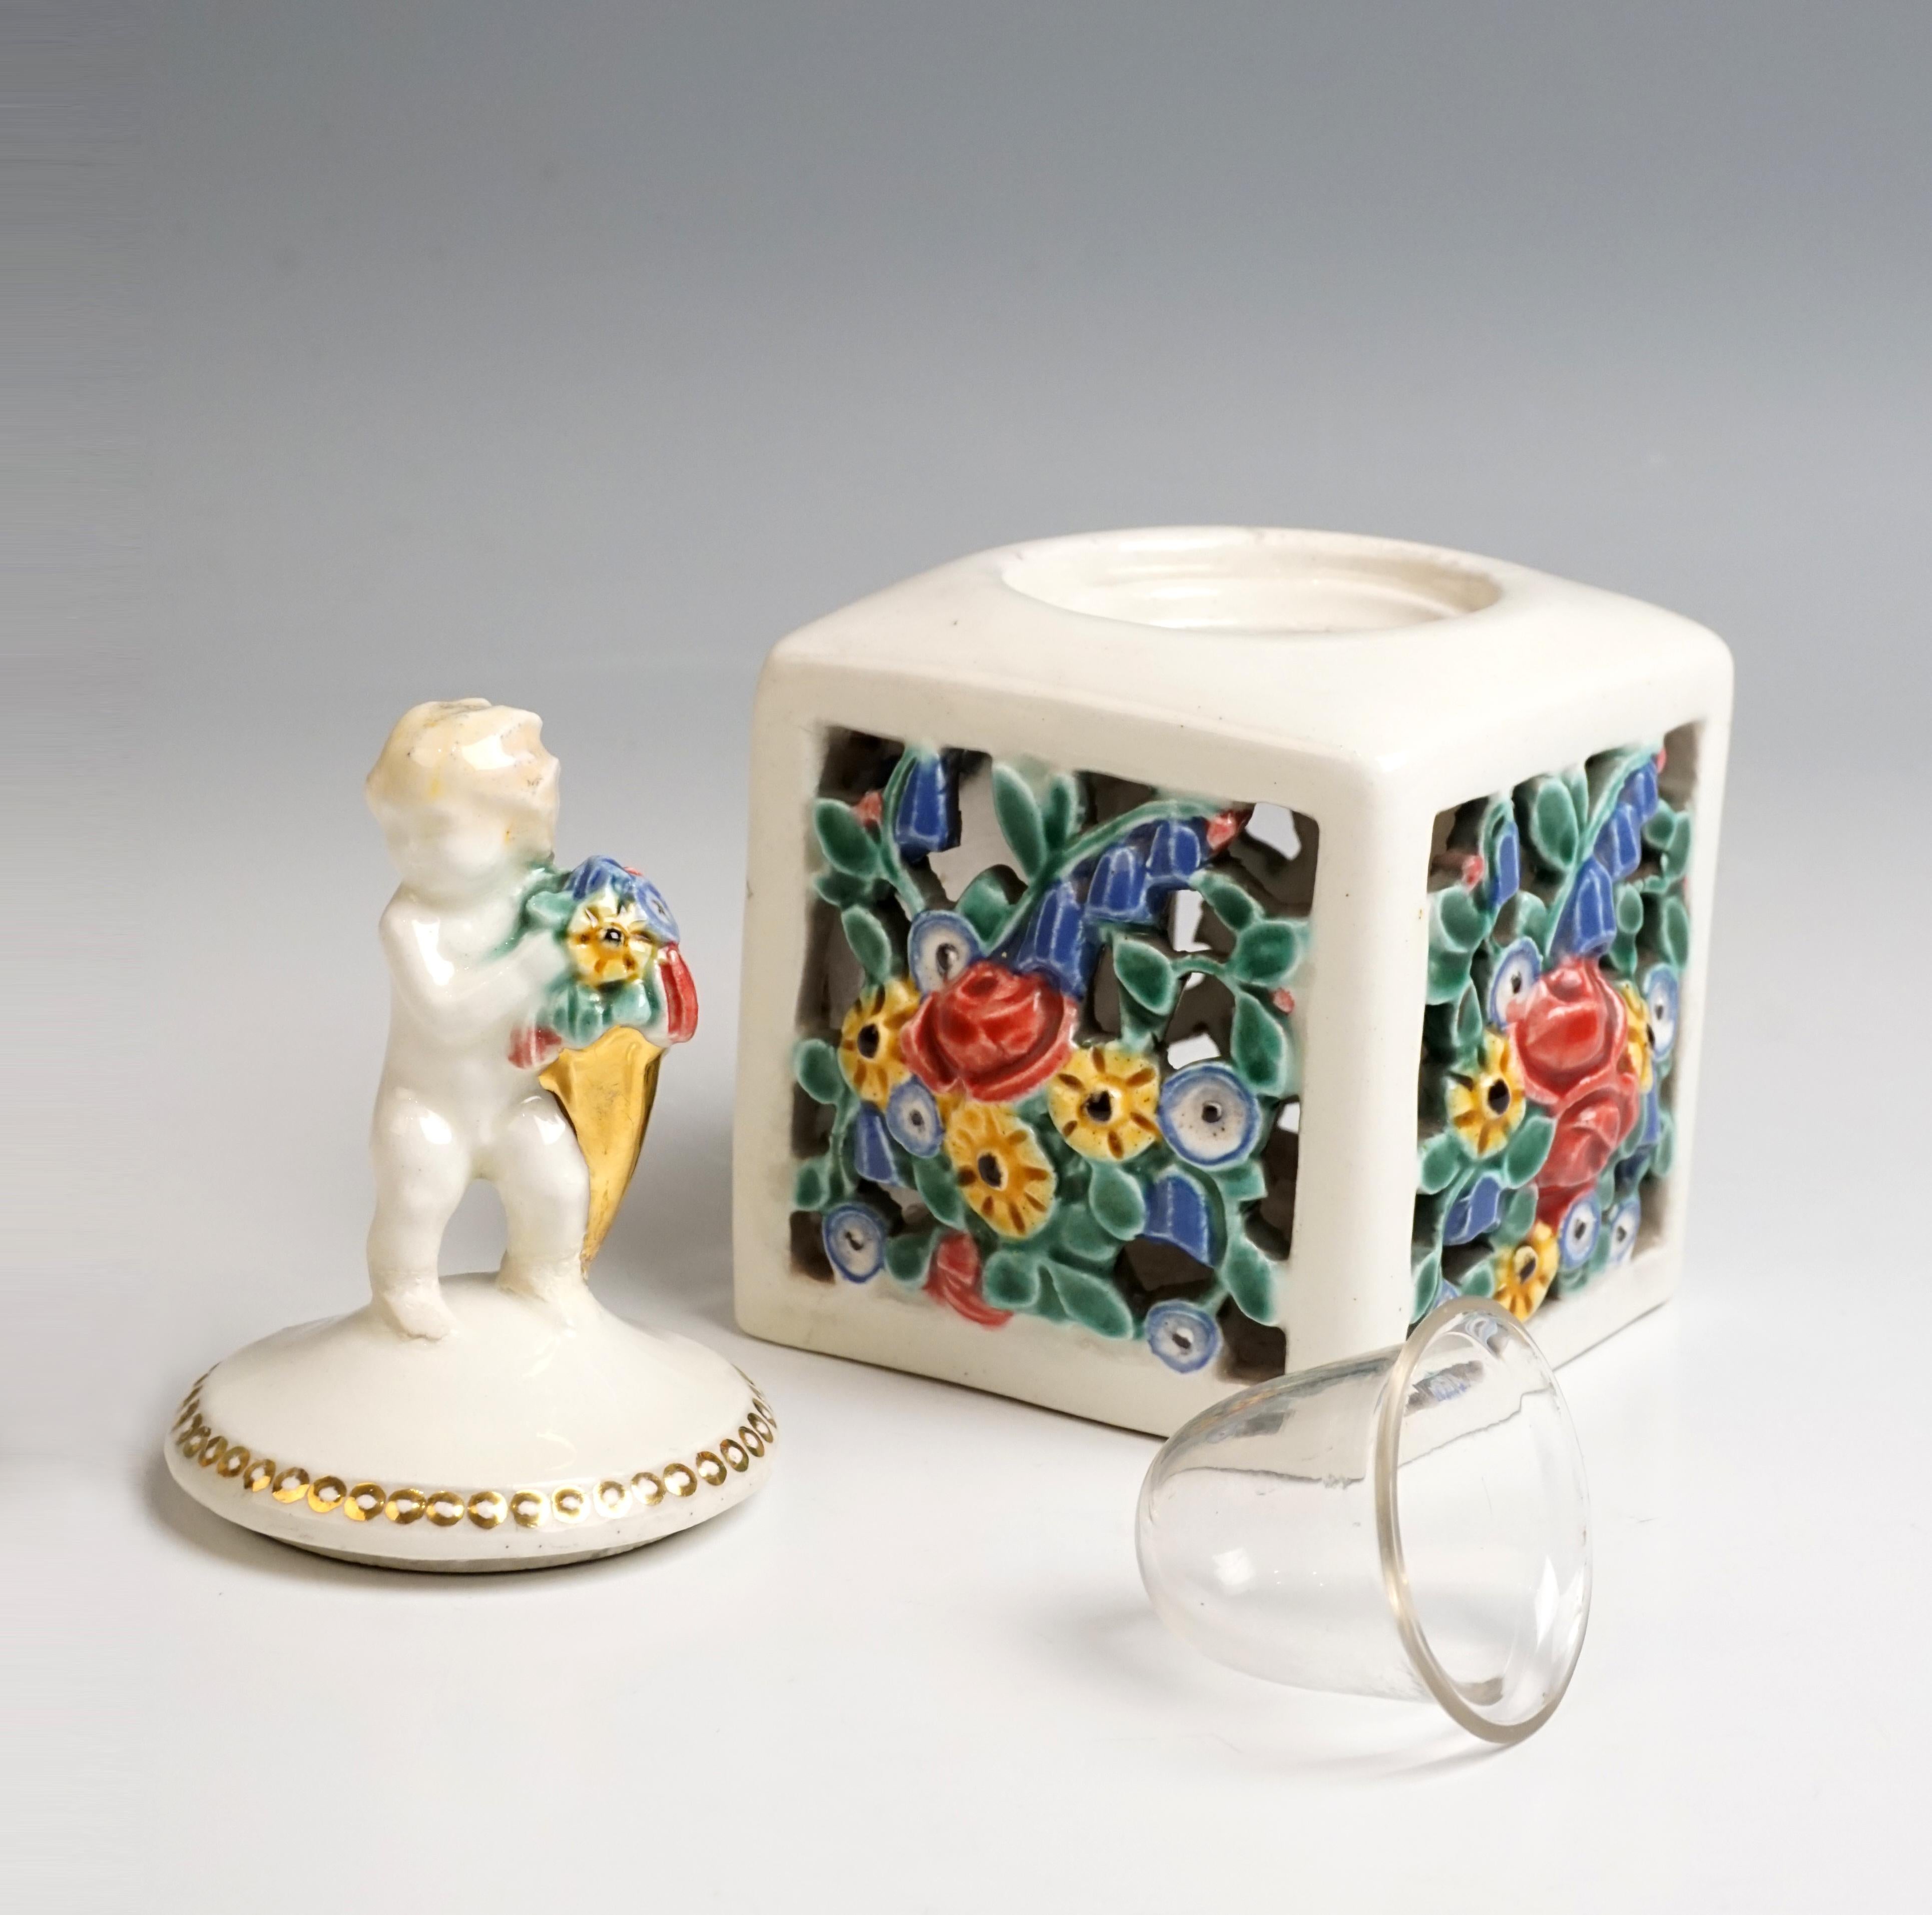 Hand-Painted Vienna Ceramics Art Nouveau Writing Set With Putto by Michael Powolny, 1910-1912